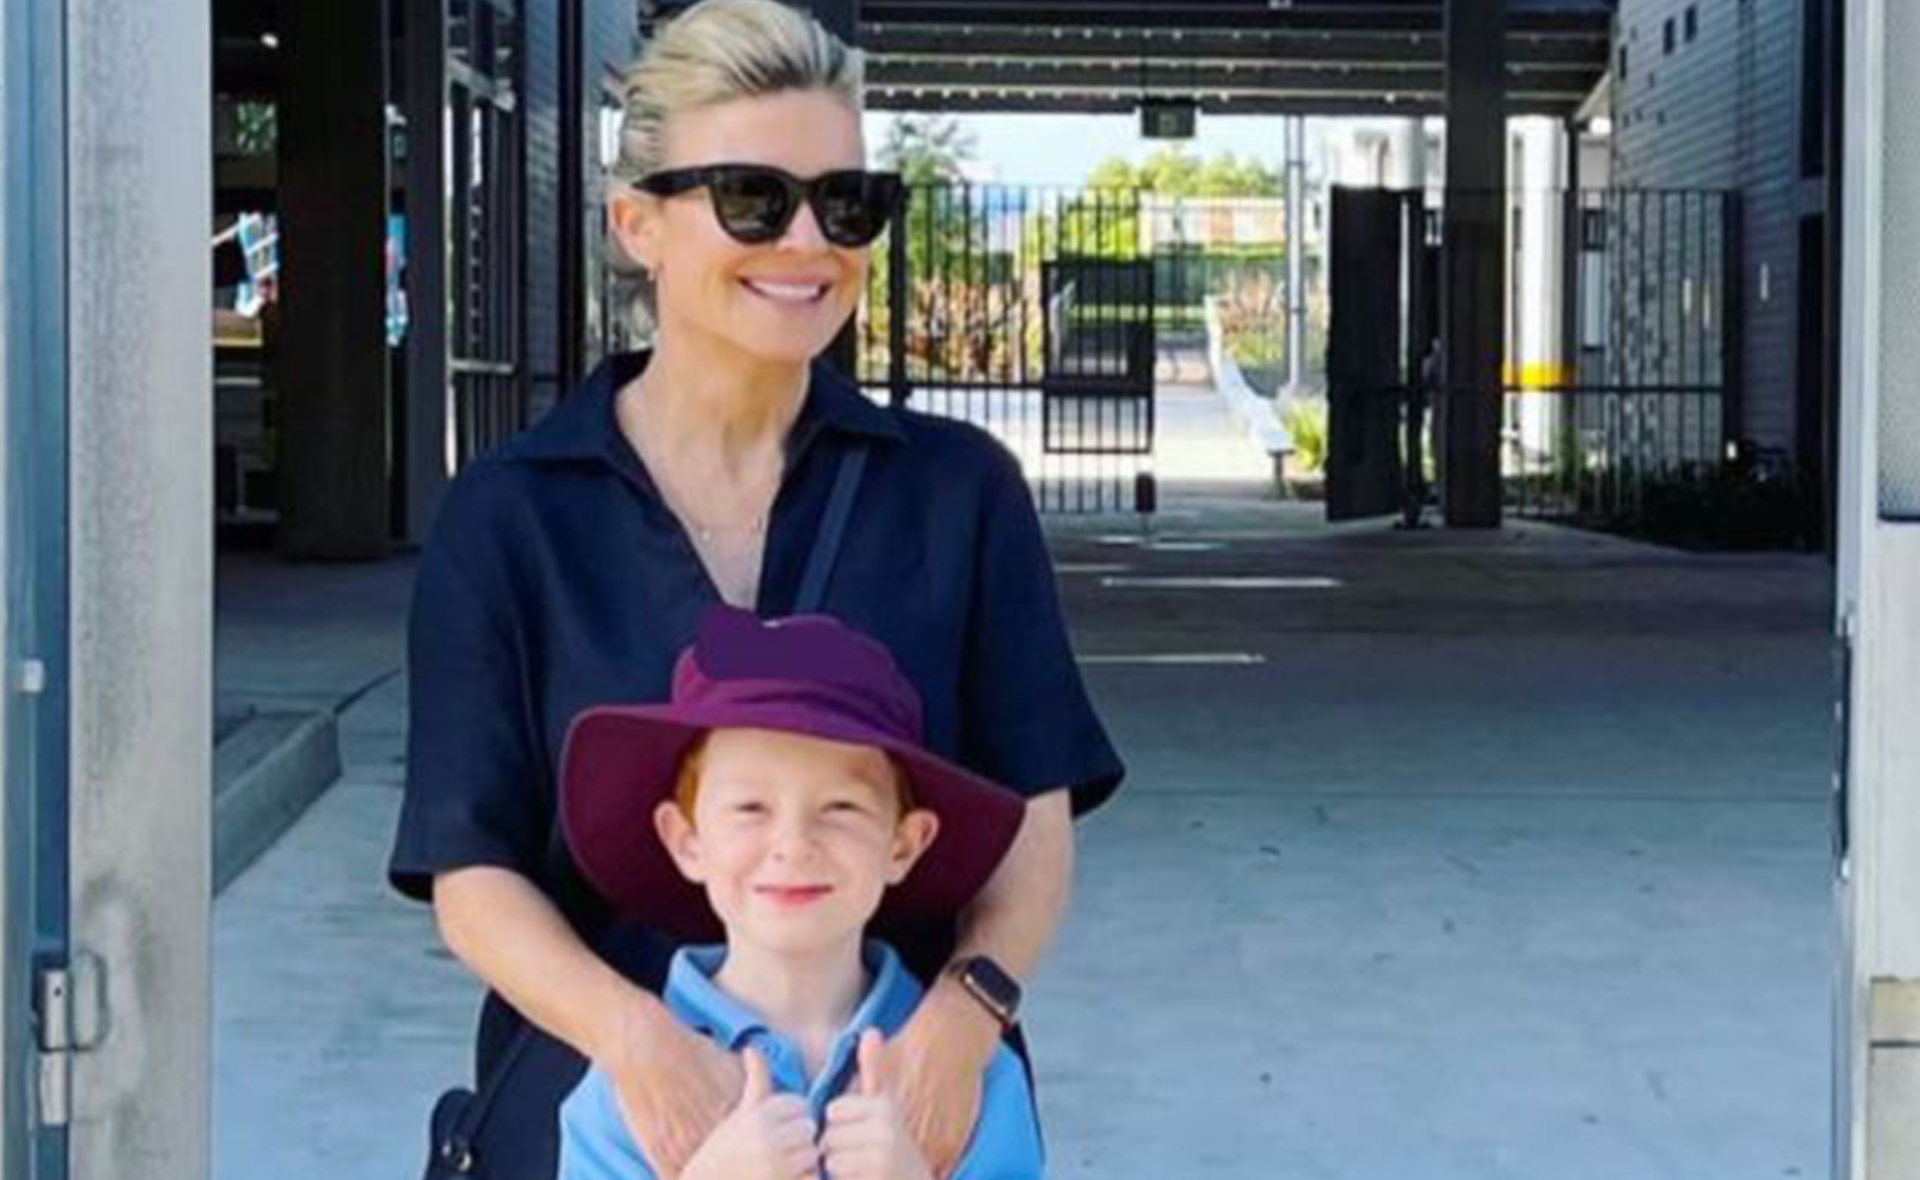 Home & Away star Emily Symons’ son gets surprised by Australian icon, Ray Meagher on day out